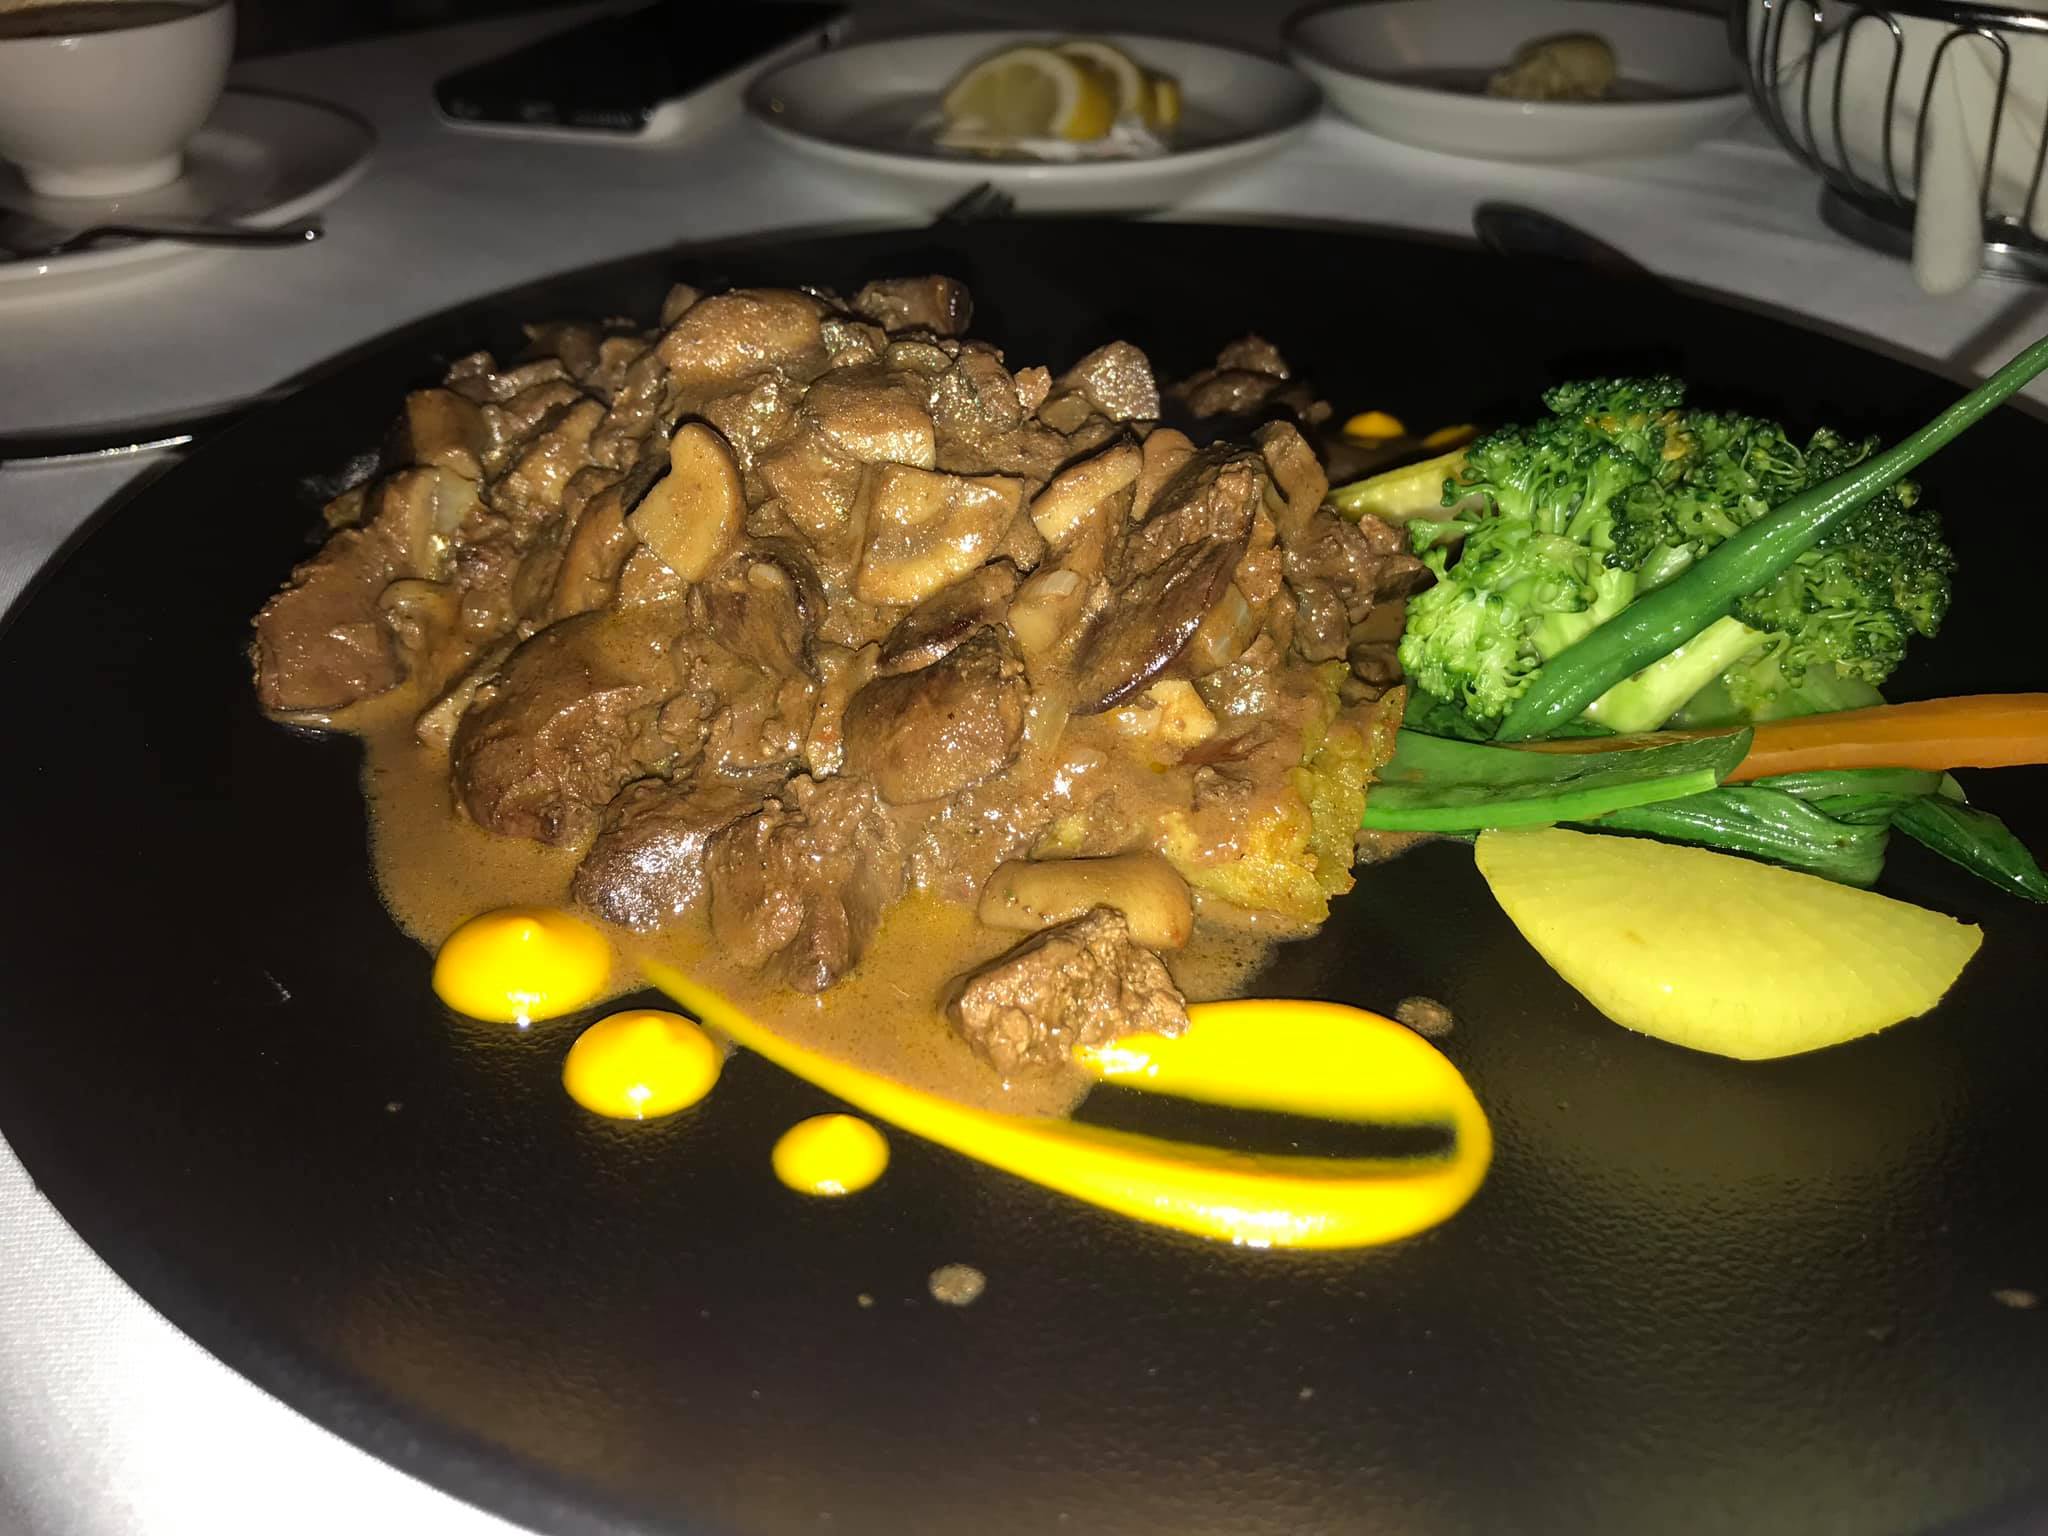  This is the chicken liver dinner at The Lord Erroll, I did not love it but I don’t love liver periods. I only ordered it because I hadn’t seen liver on a menu in a while so I was curious.  